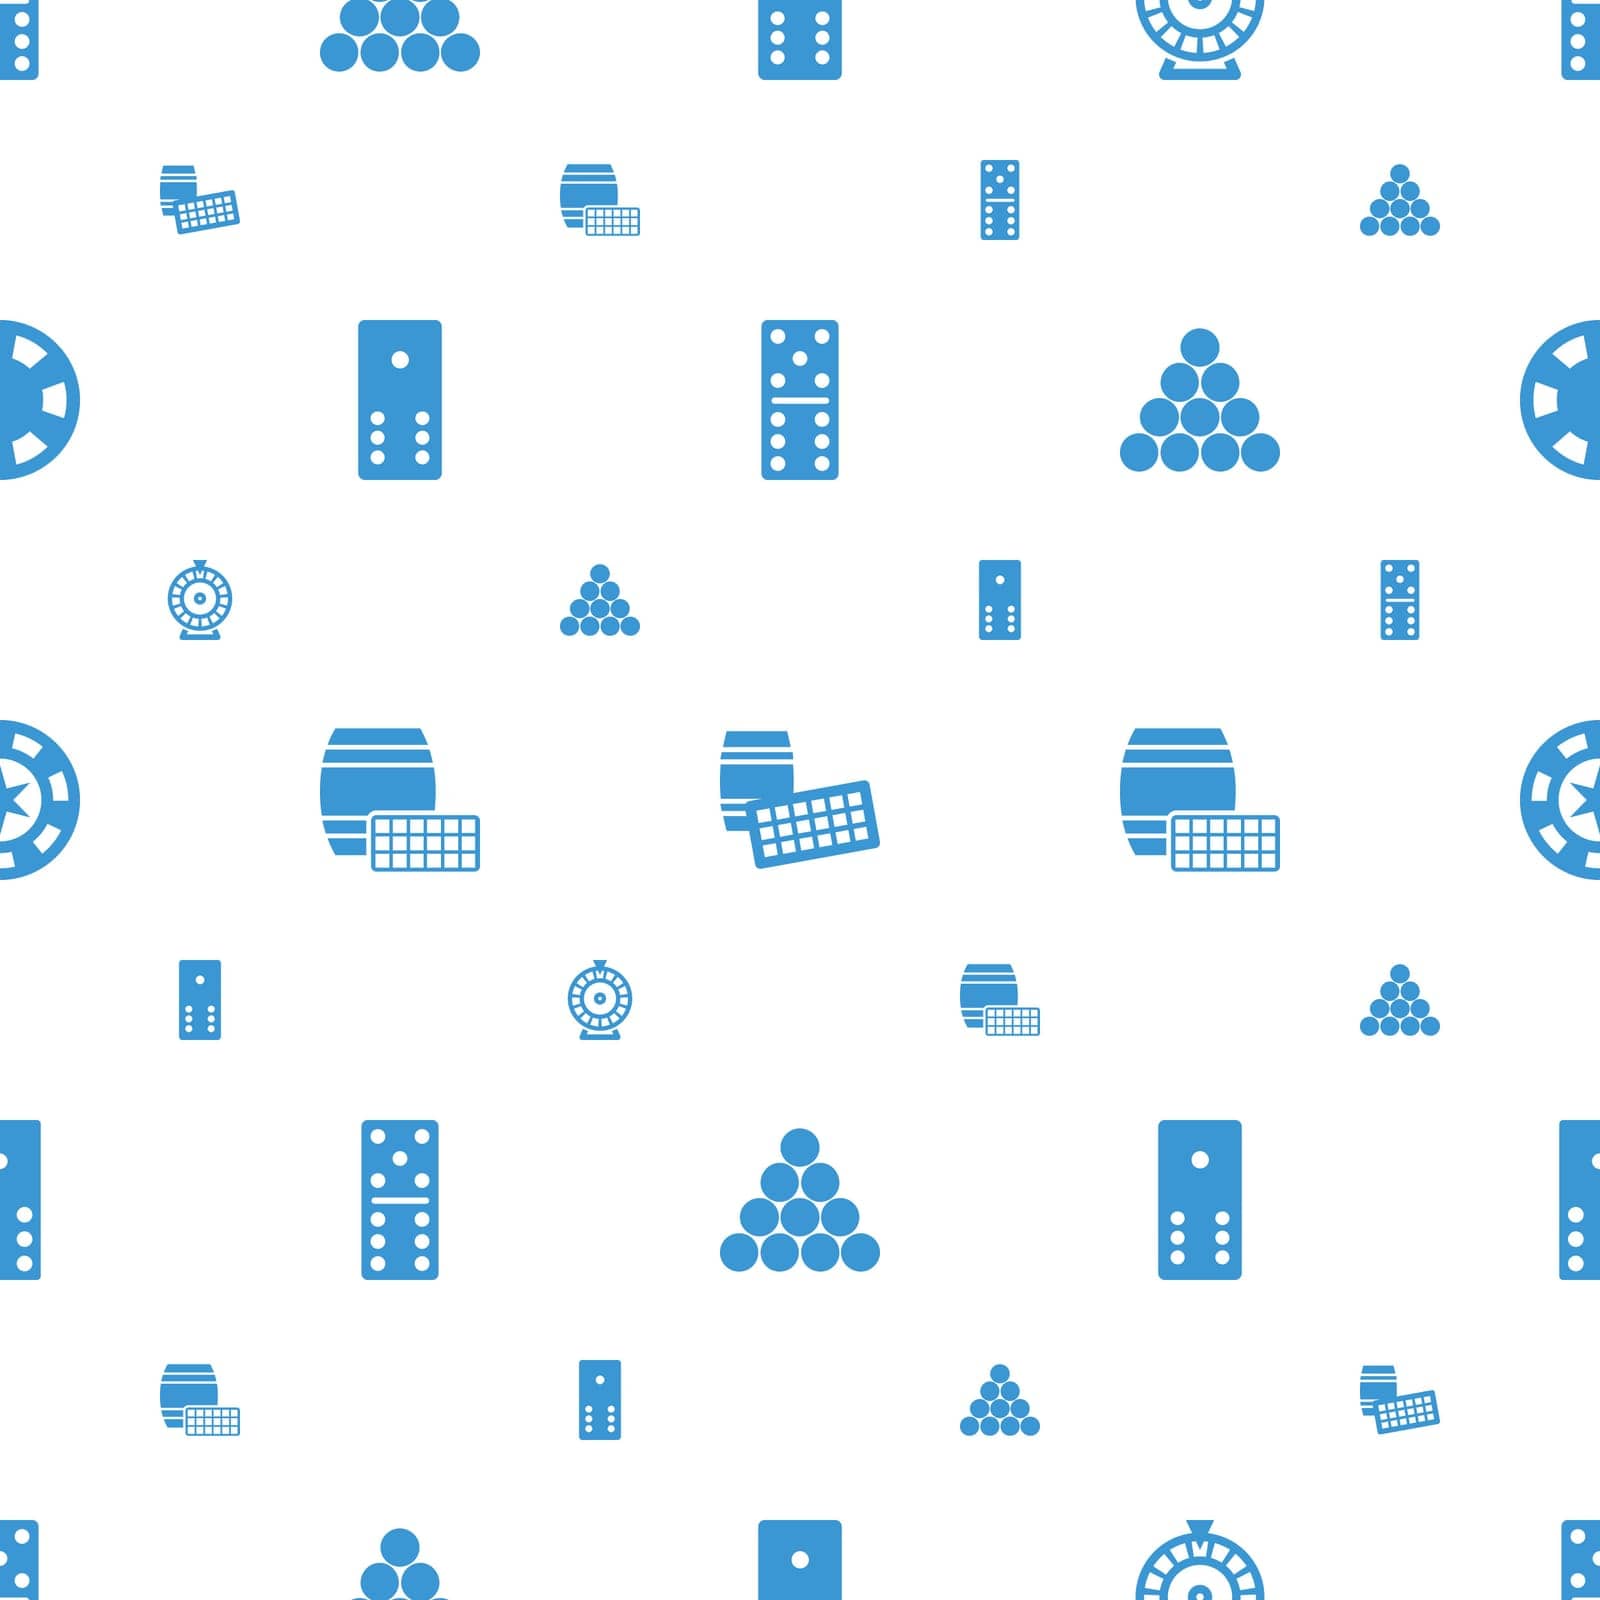 play,symbol,game,luck,color,activity,entertainment,pattern,icon,sign,isolated,gambling,casino,triangle,bet,ball,number,white,web,flat,roulette,design,logo,vector,domino,win,leisure,table,element,chip,set,shape,gamble,black,lotto,background,success,illustration,sport,biliard,object by ogqcorp